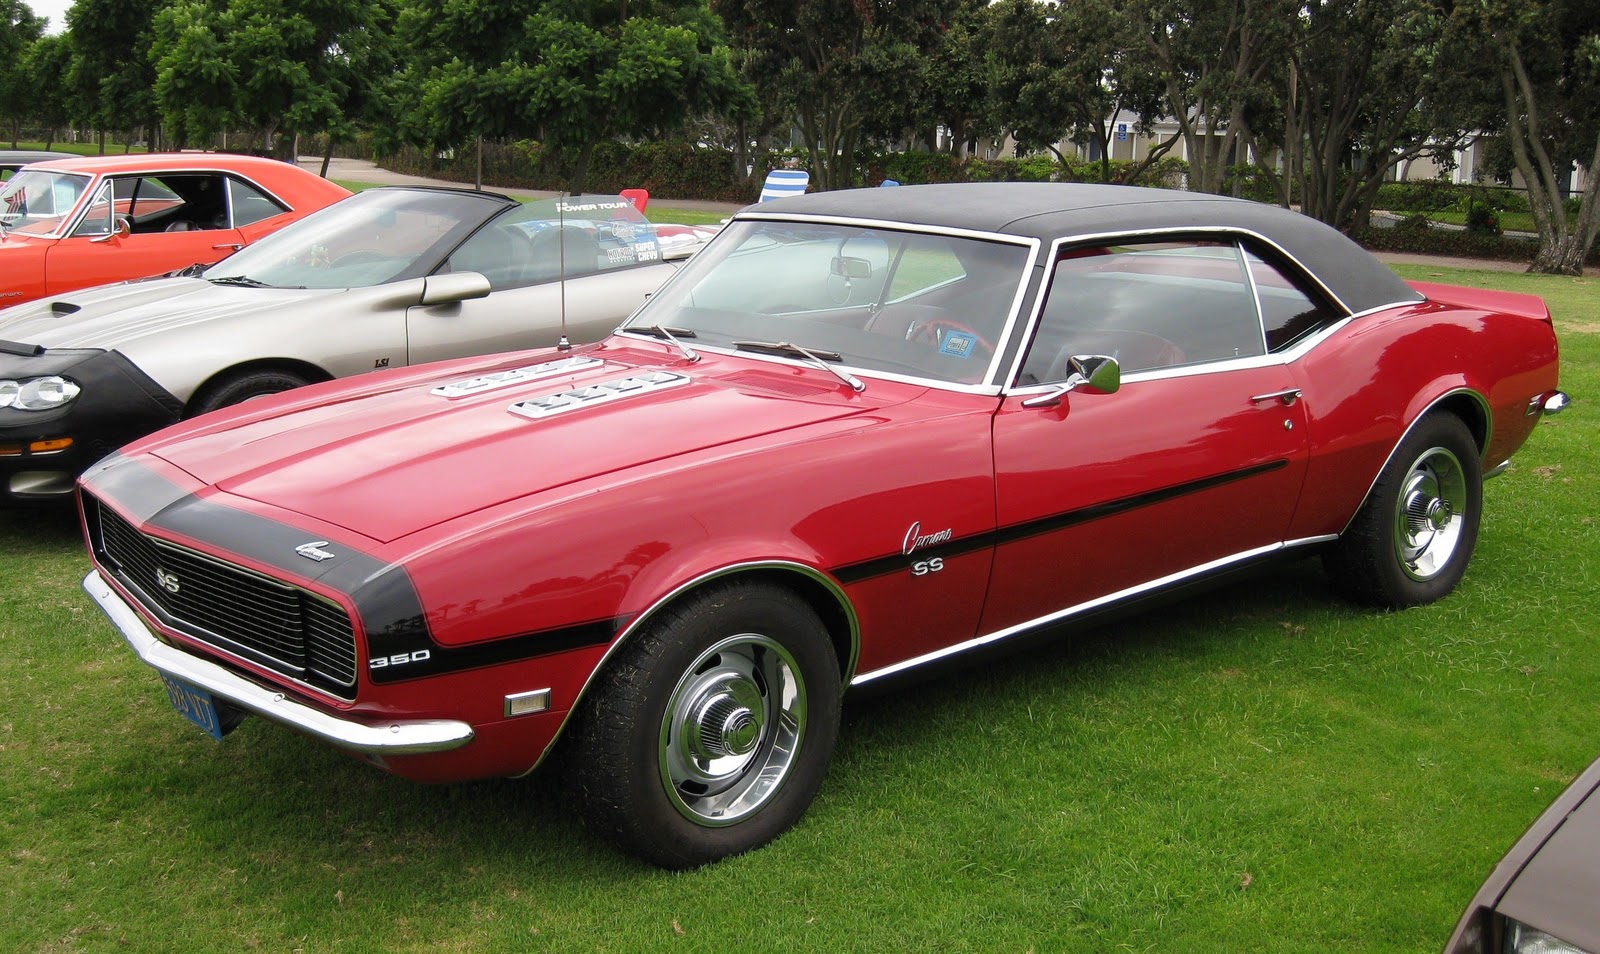 1968 Camaro Specifications And Restoration The Classic Muscle Car Review